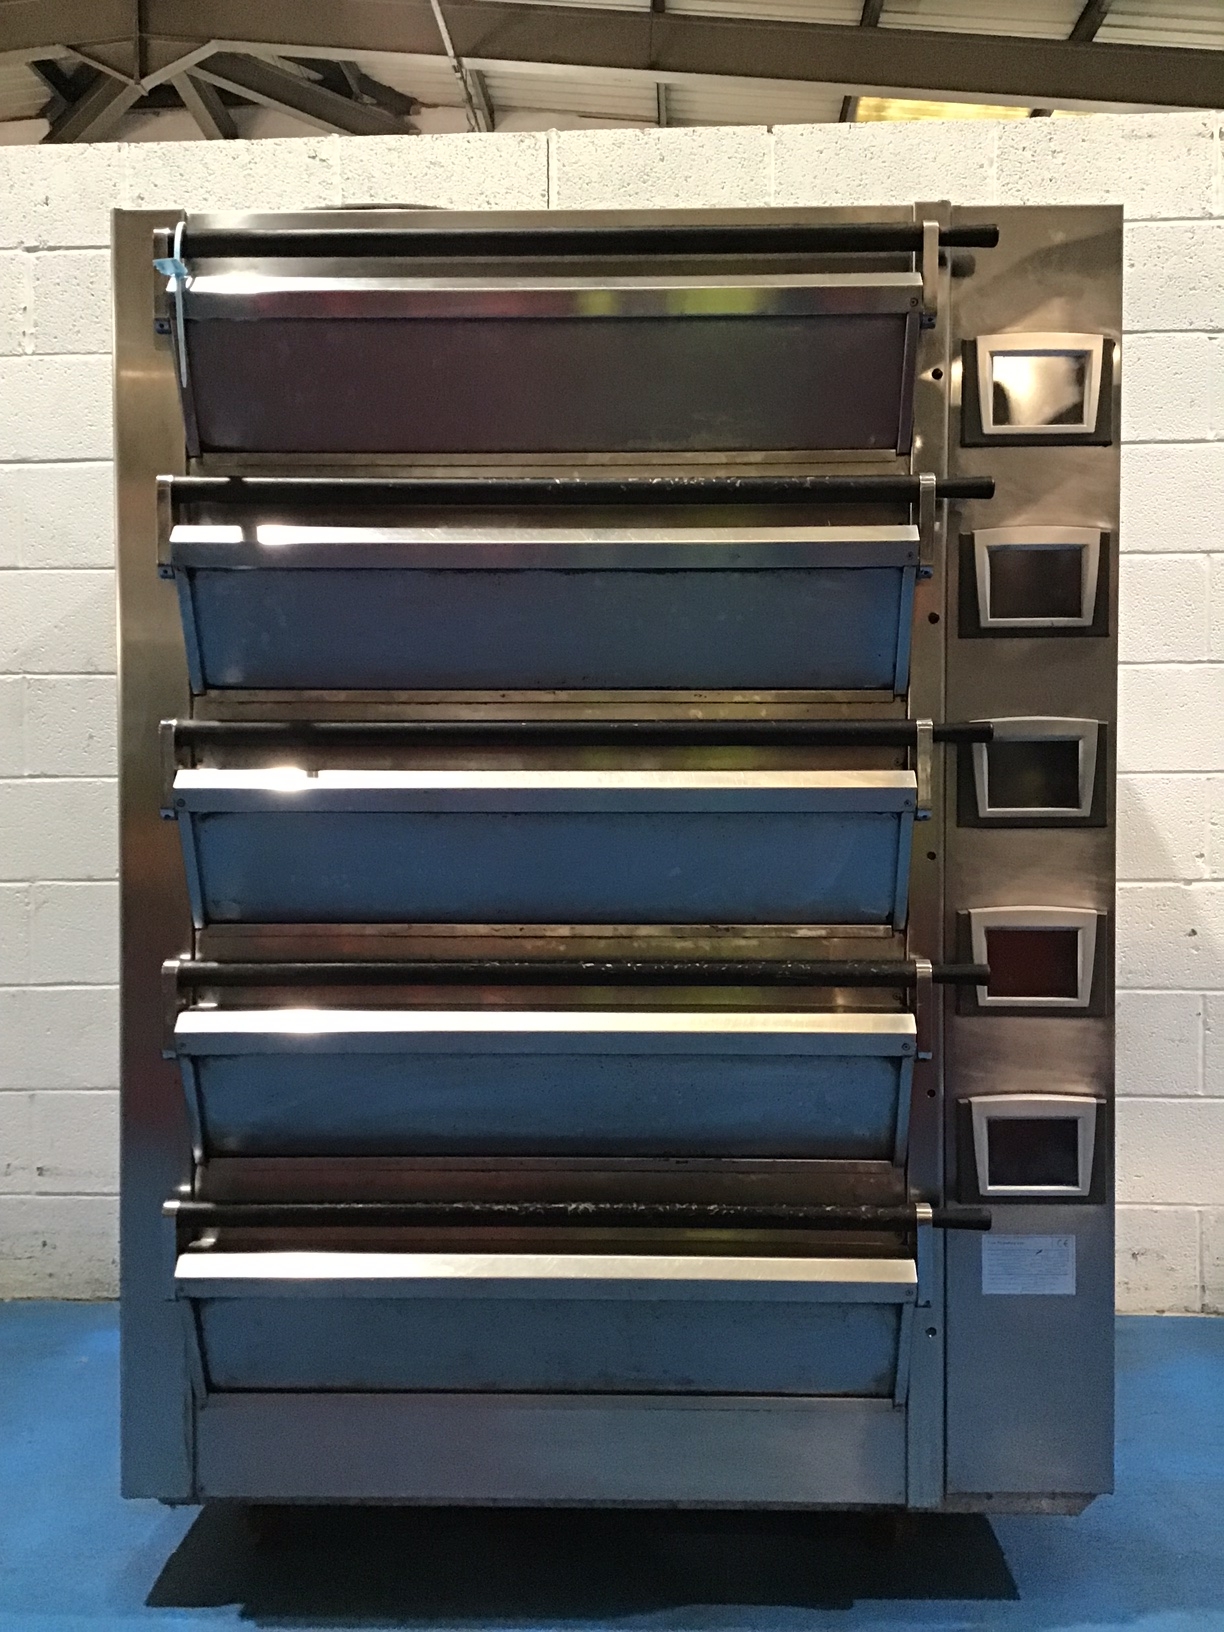 Tom Chandley 10 Tray (18" x 30" Trays) Deck Oven